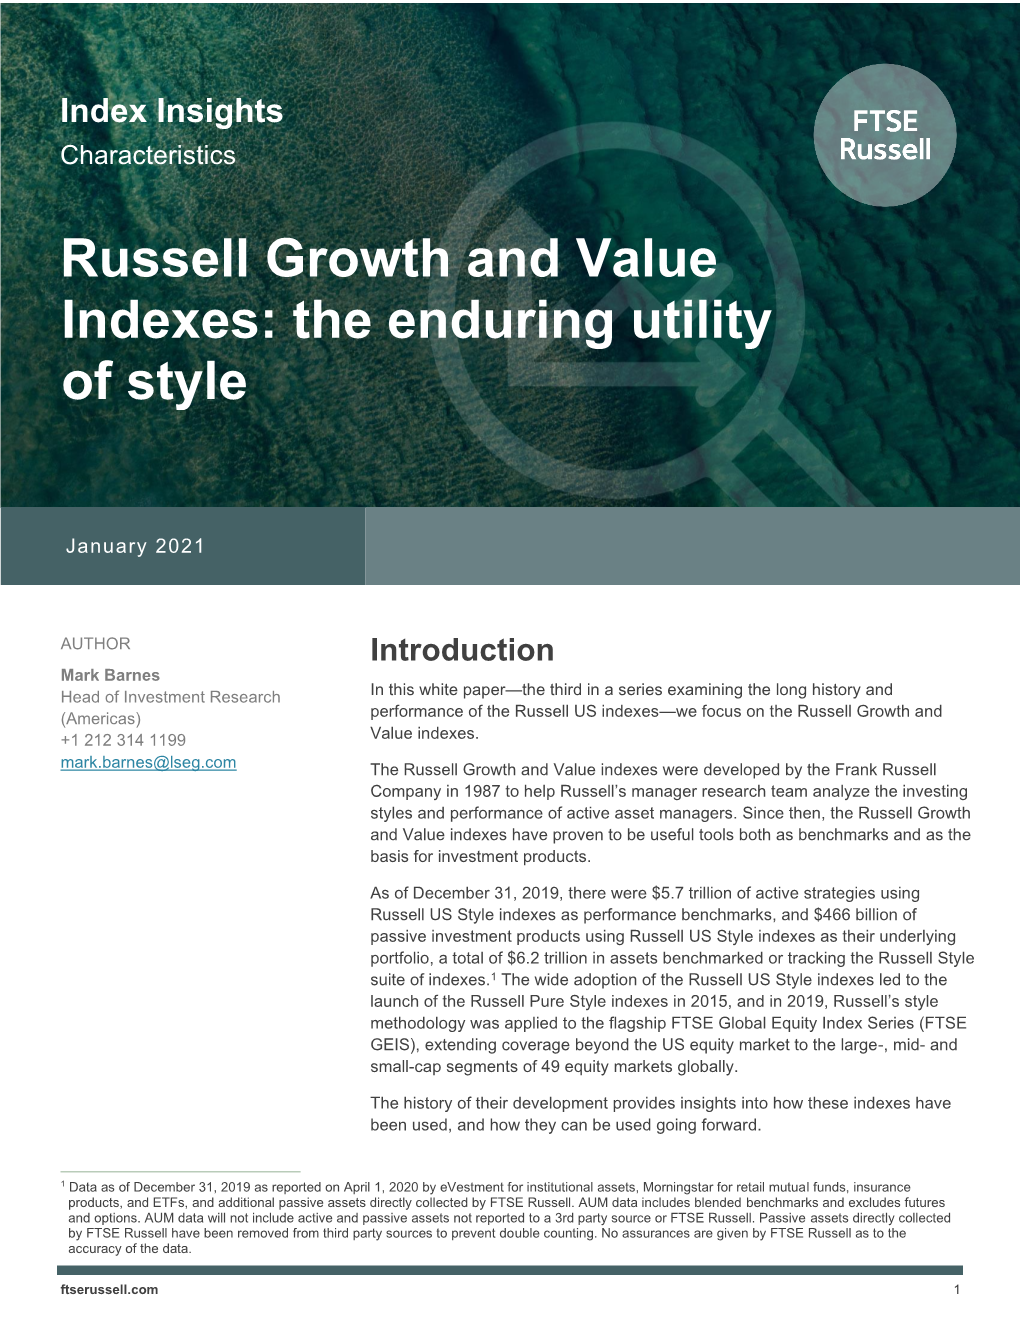 Russell Growth and Value Indexes: the Enduring Utility of Style